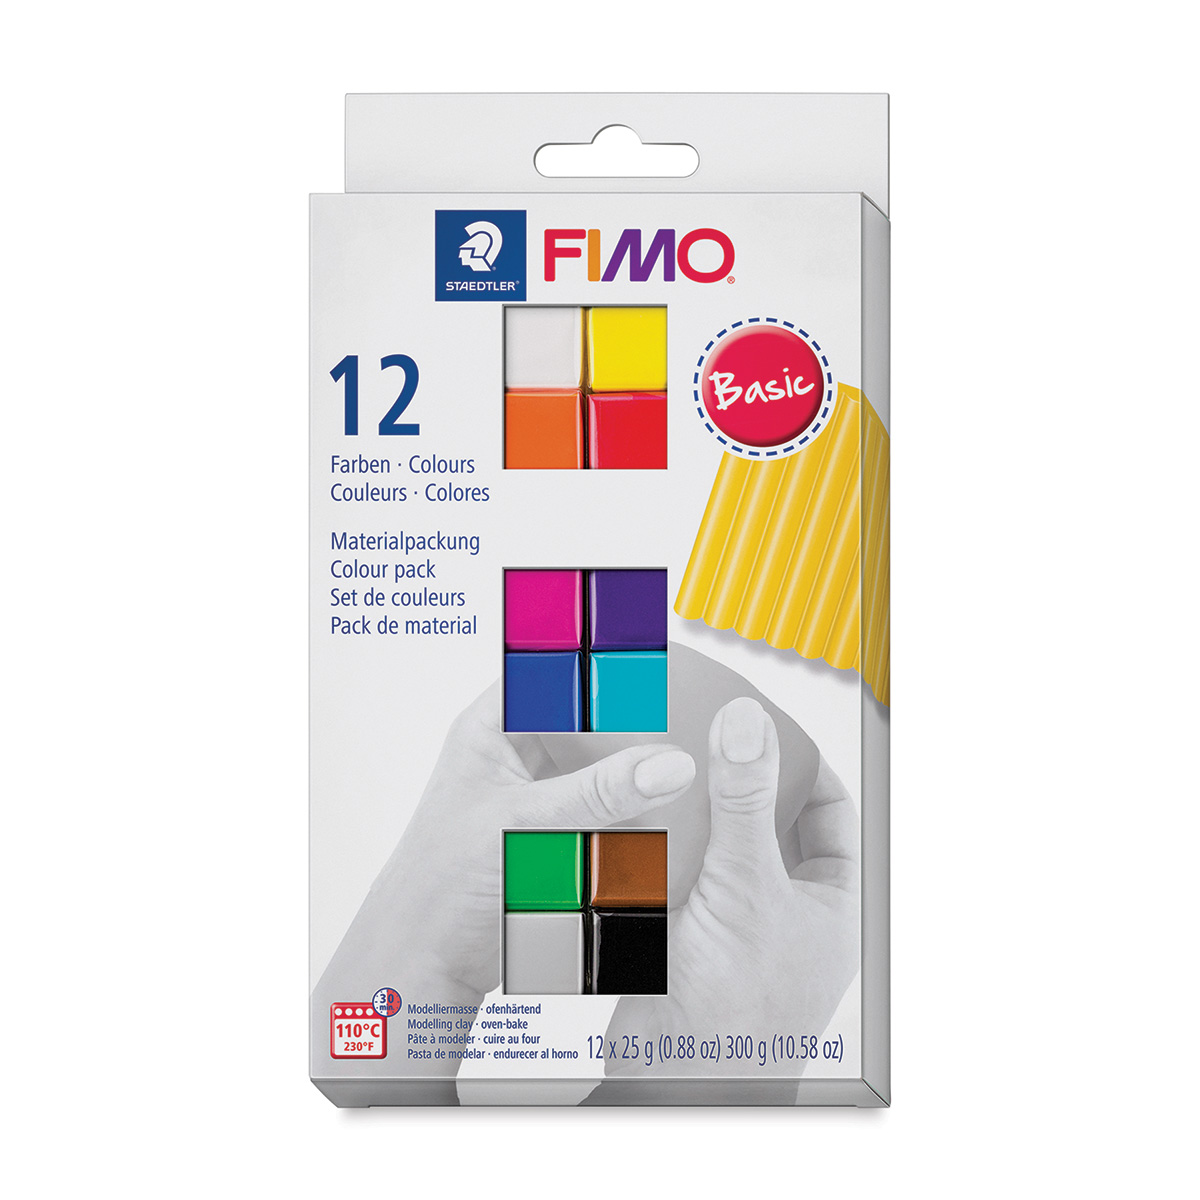 Fimo Soft -- Green Olive - Polymer Clay Superstore